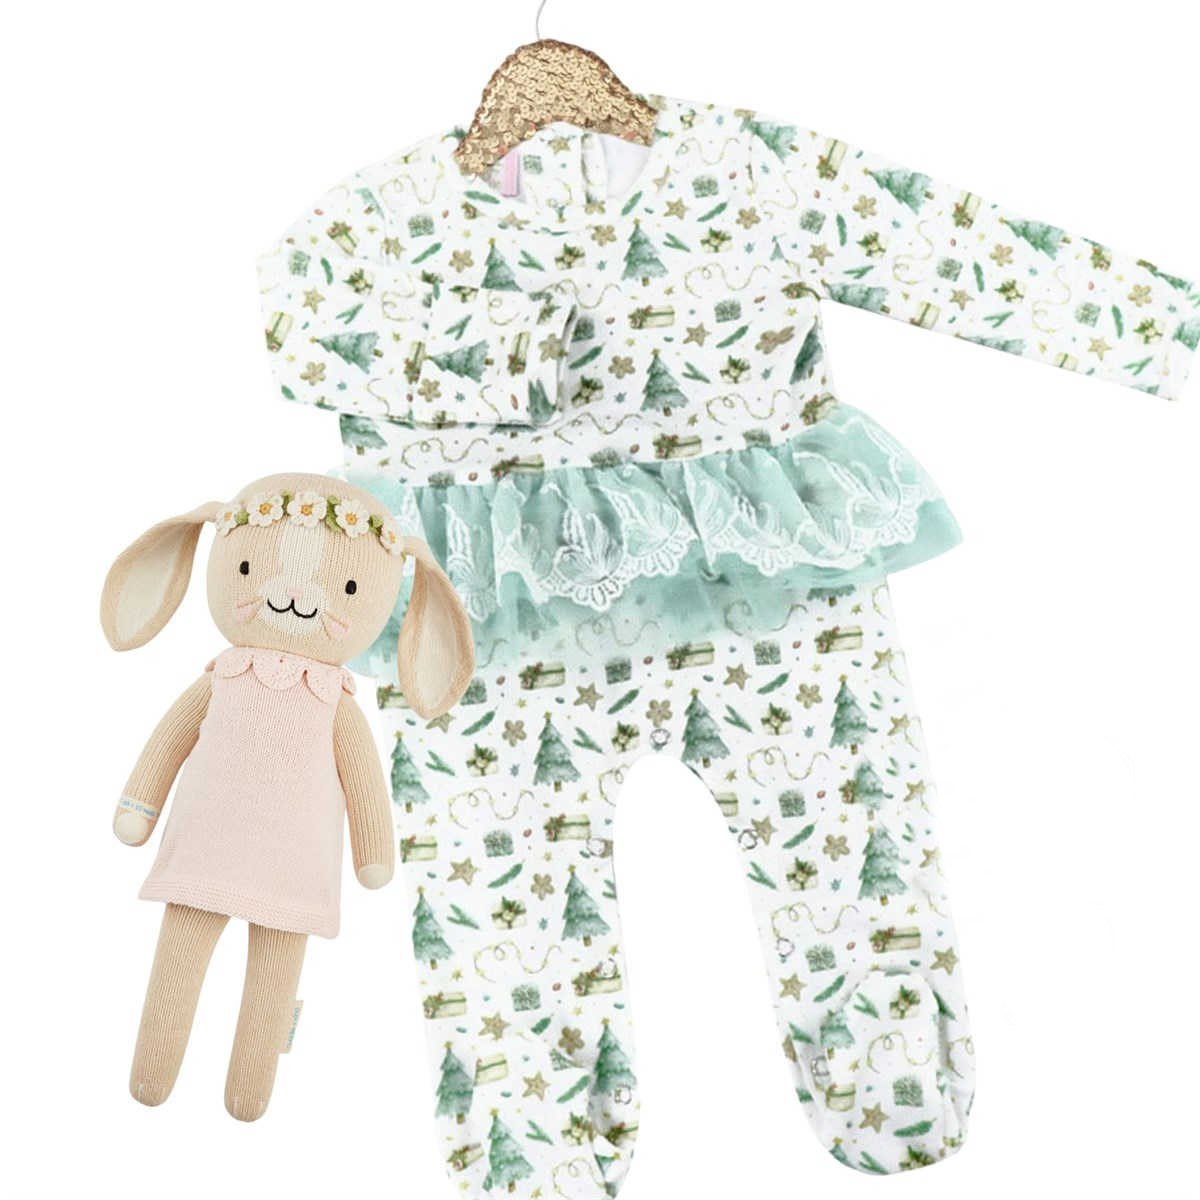 Kryssi Kouture Sienna Holiday Infant Deluxe Tutu Jumpsuit - White & Blue Trees Tutu. Includes green trees, presents & stars. The tutu around the waist is also green/blue.